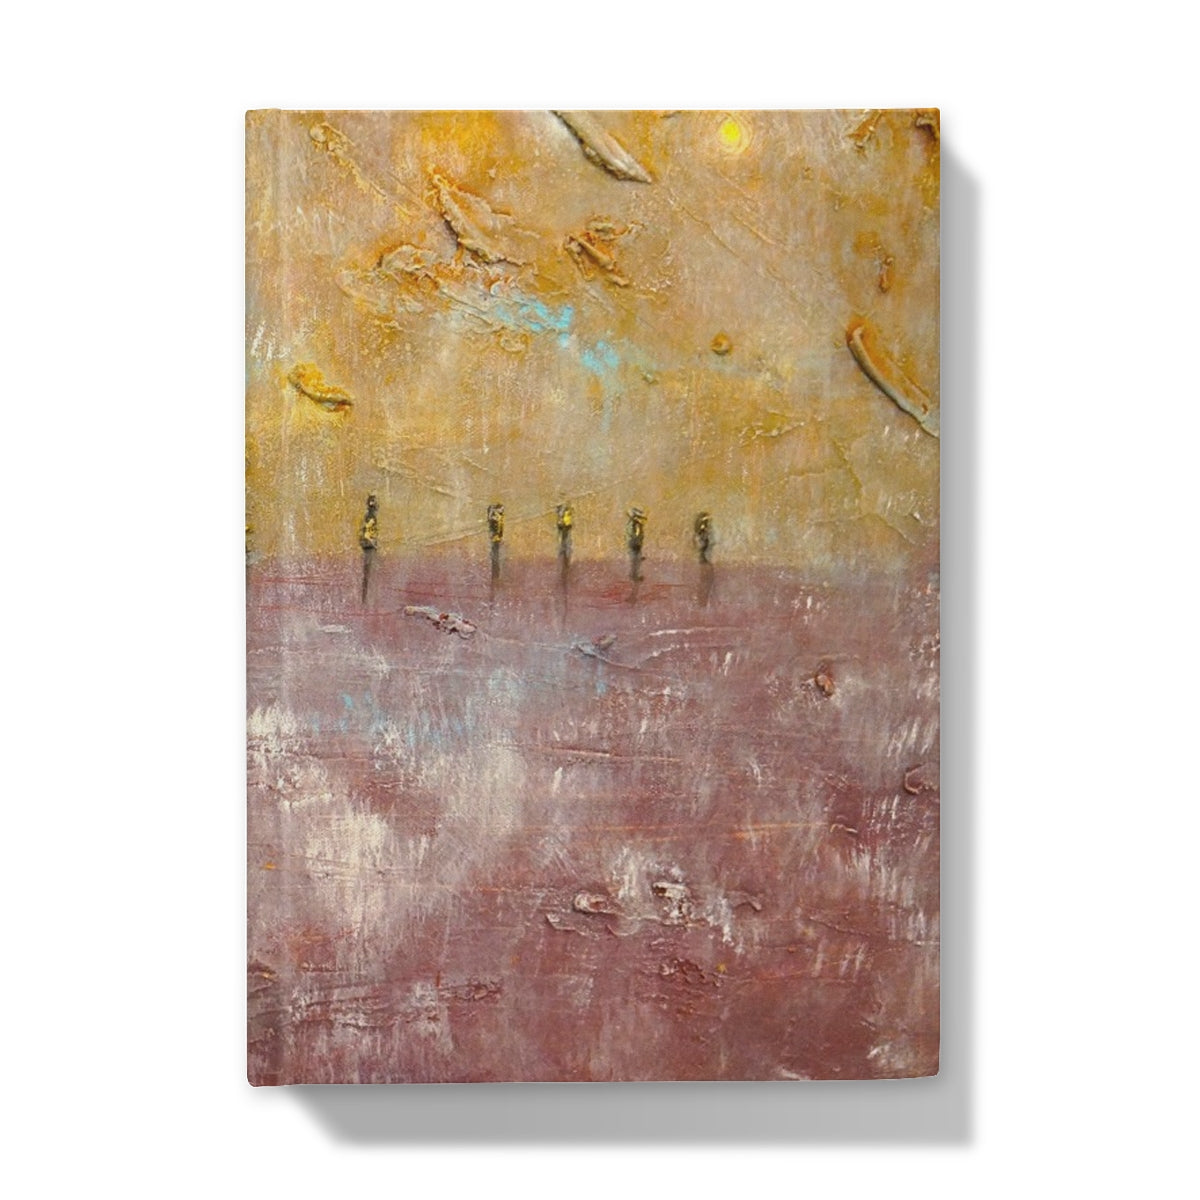 Bordgar Mist Orkney Art Gifts Hardback Journal-Journals & Notebooks-Orkney Art Gallery-5"x7"-Lined-Paintings, Prints, Homeware, Art Gifts From Scotland By Scottish Artist Kevin Hunter